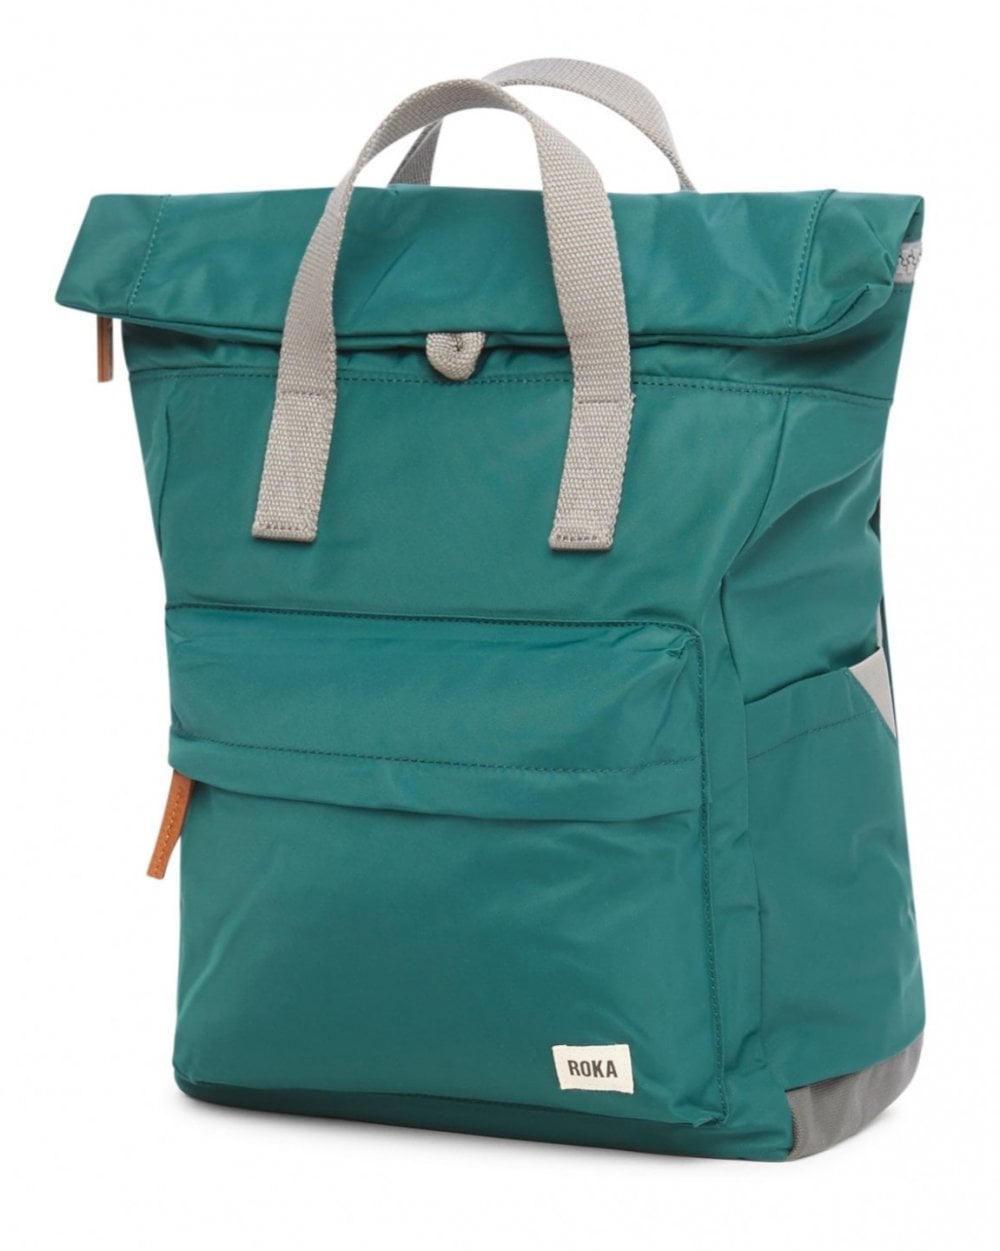 Canfield B Sustainable Teal Medium Backpack